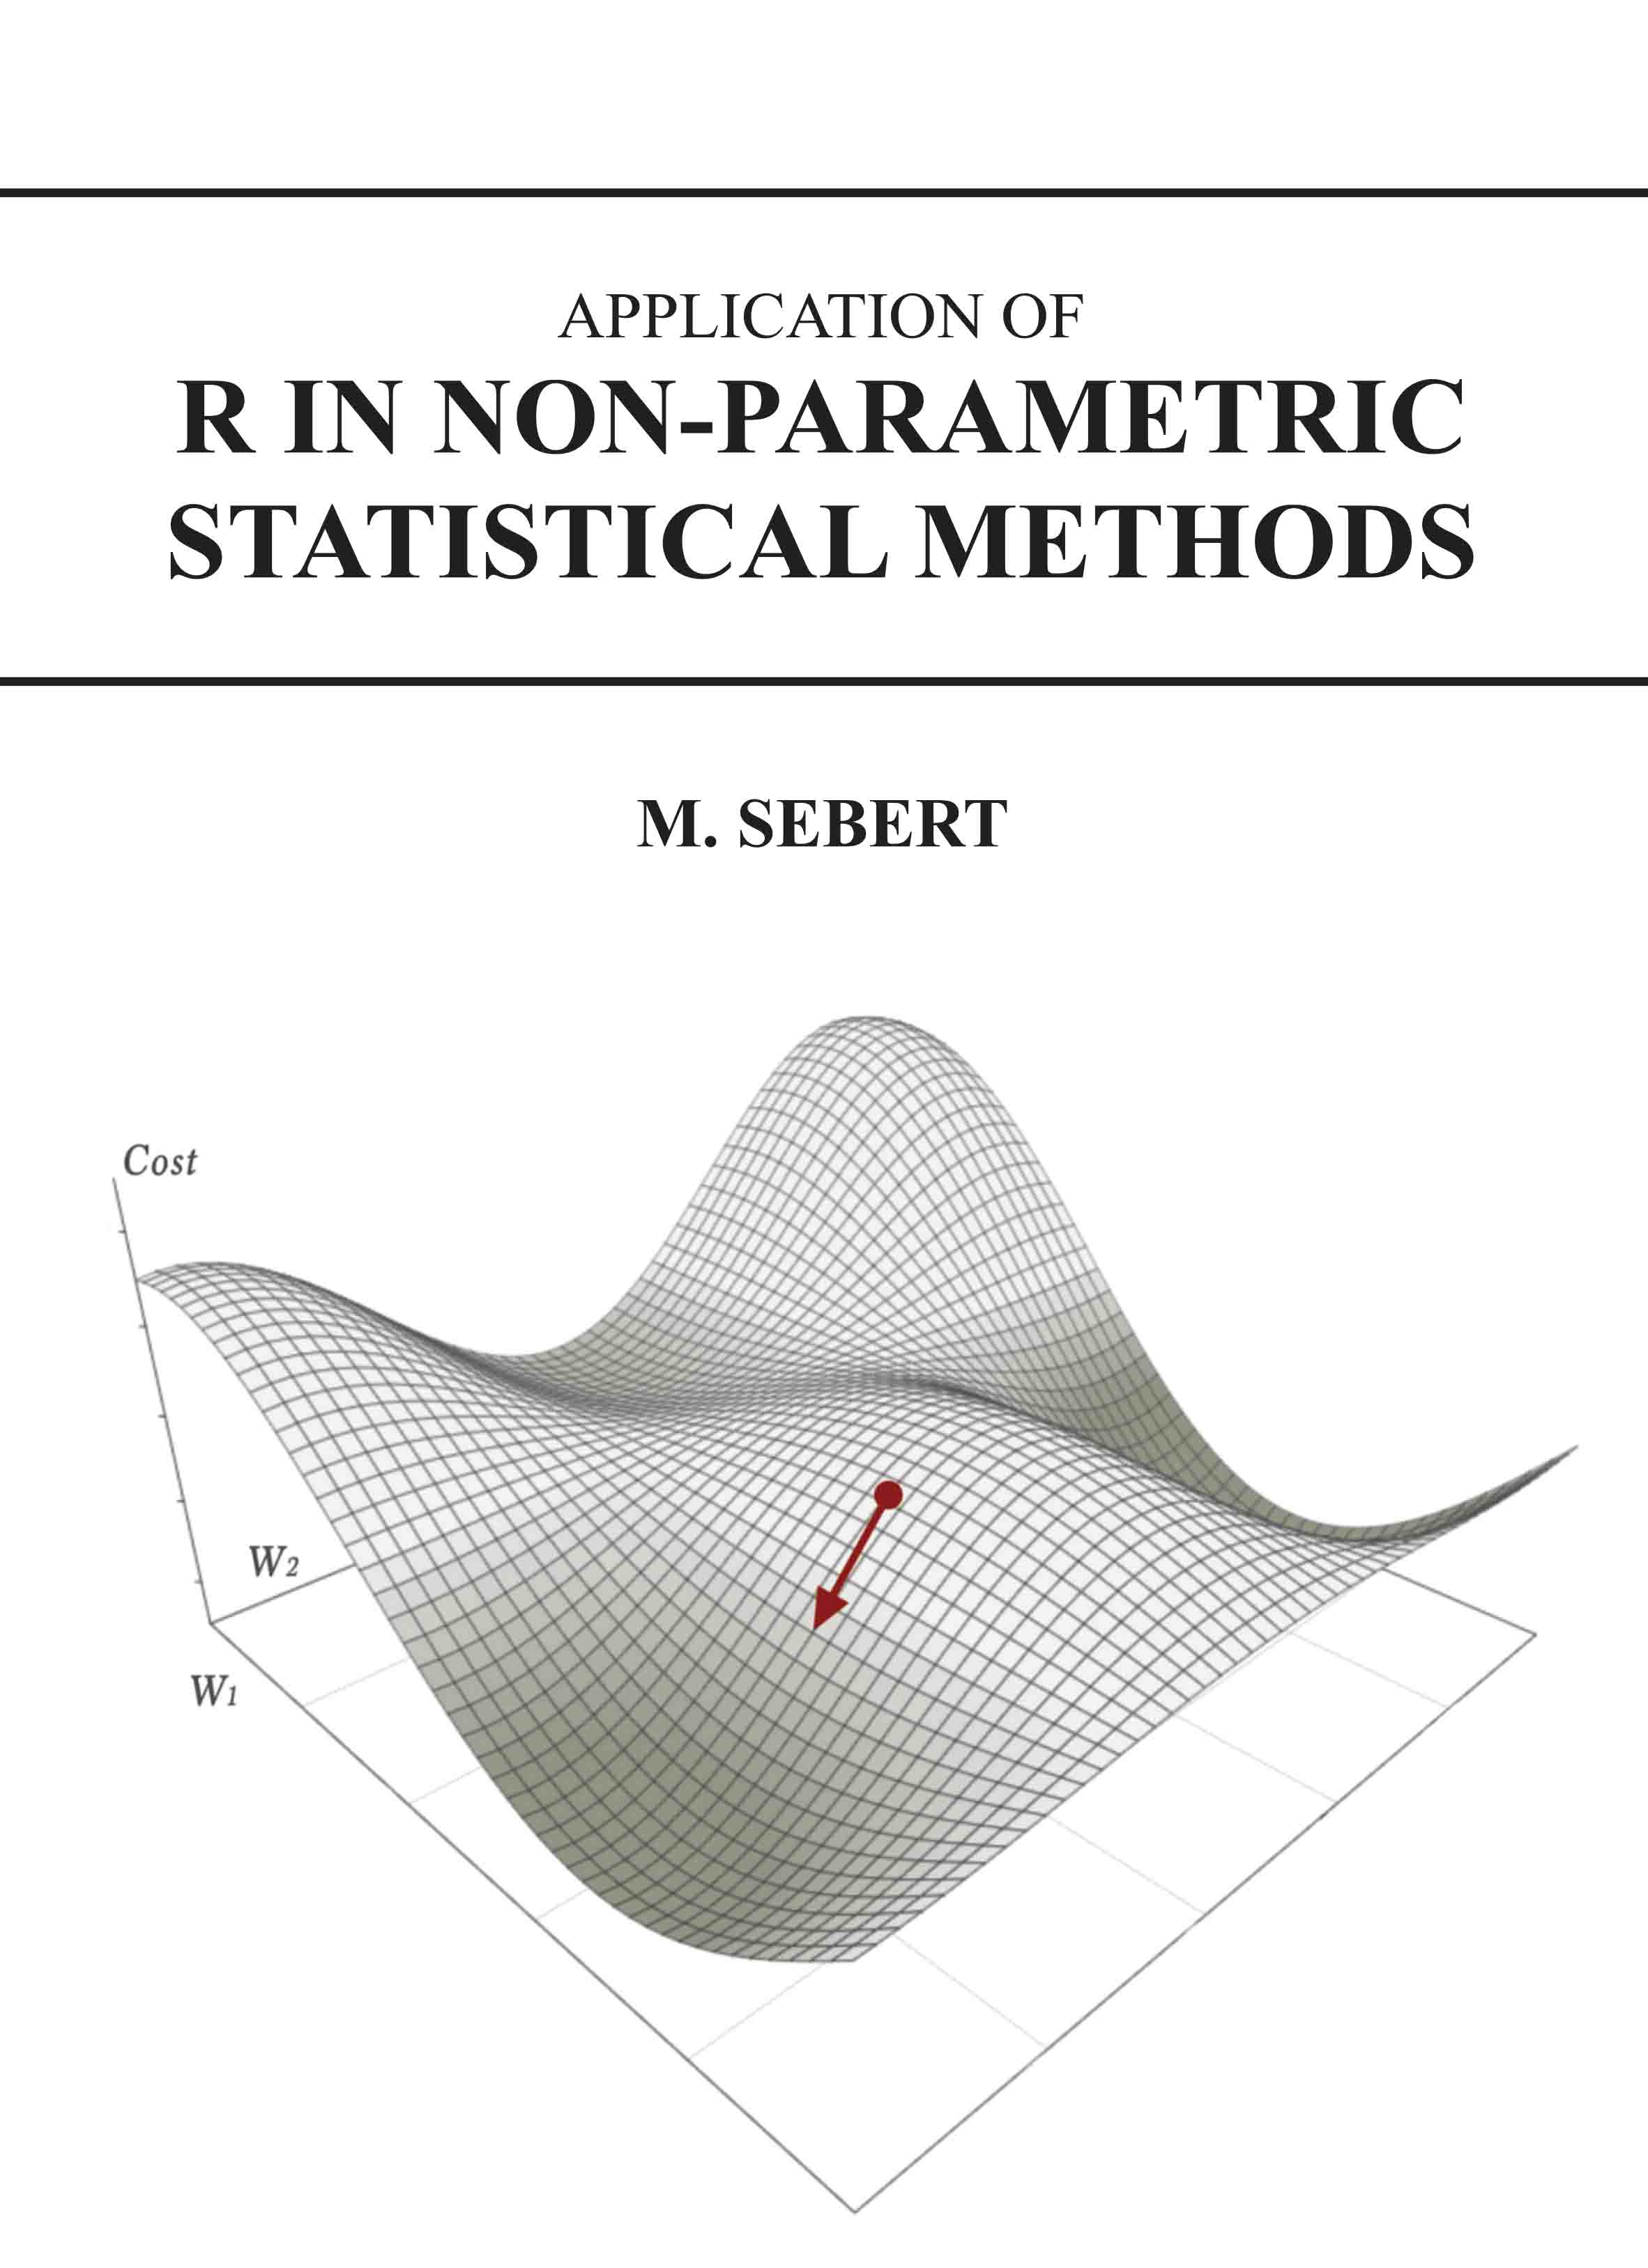 Application of R in NonParametric Statistical Methods